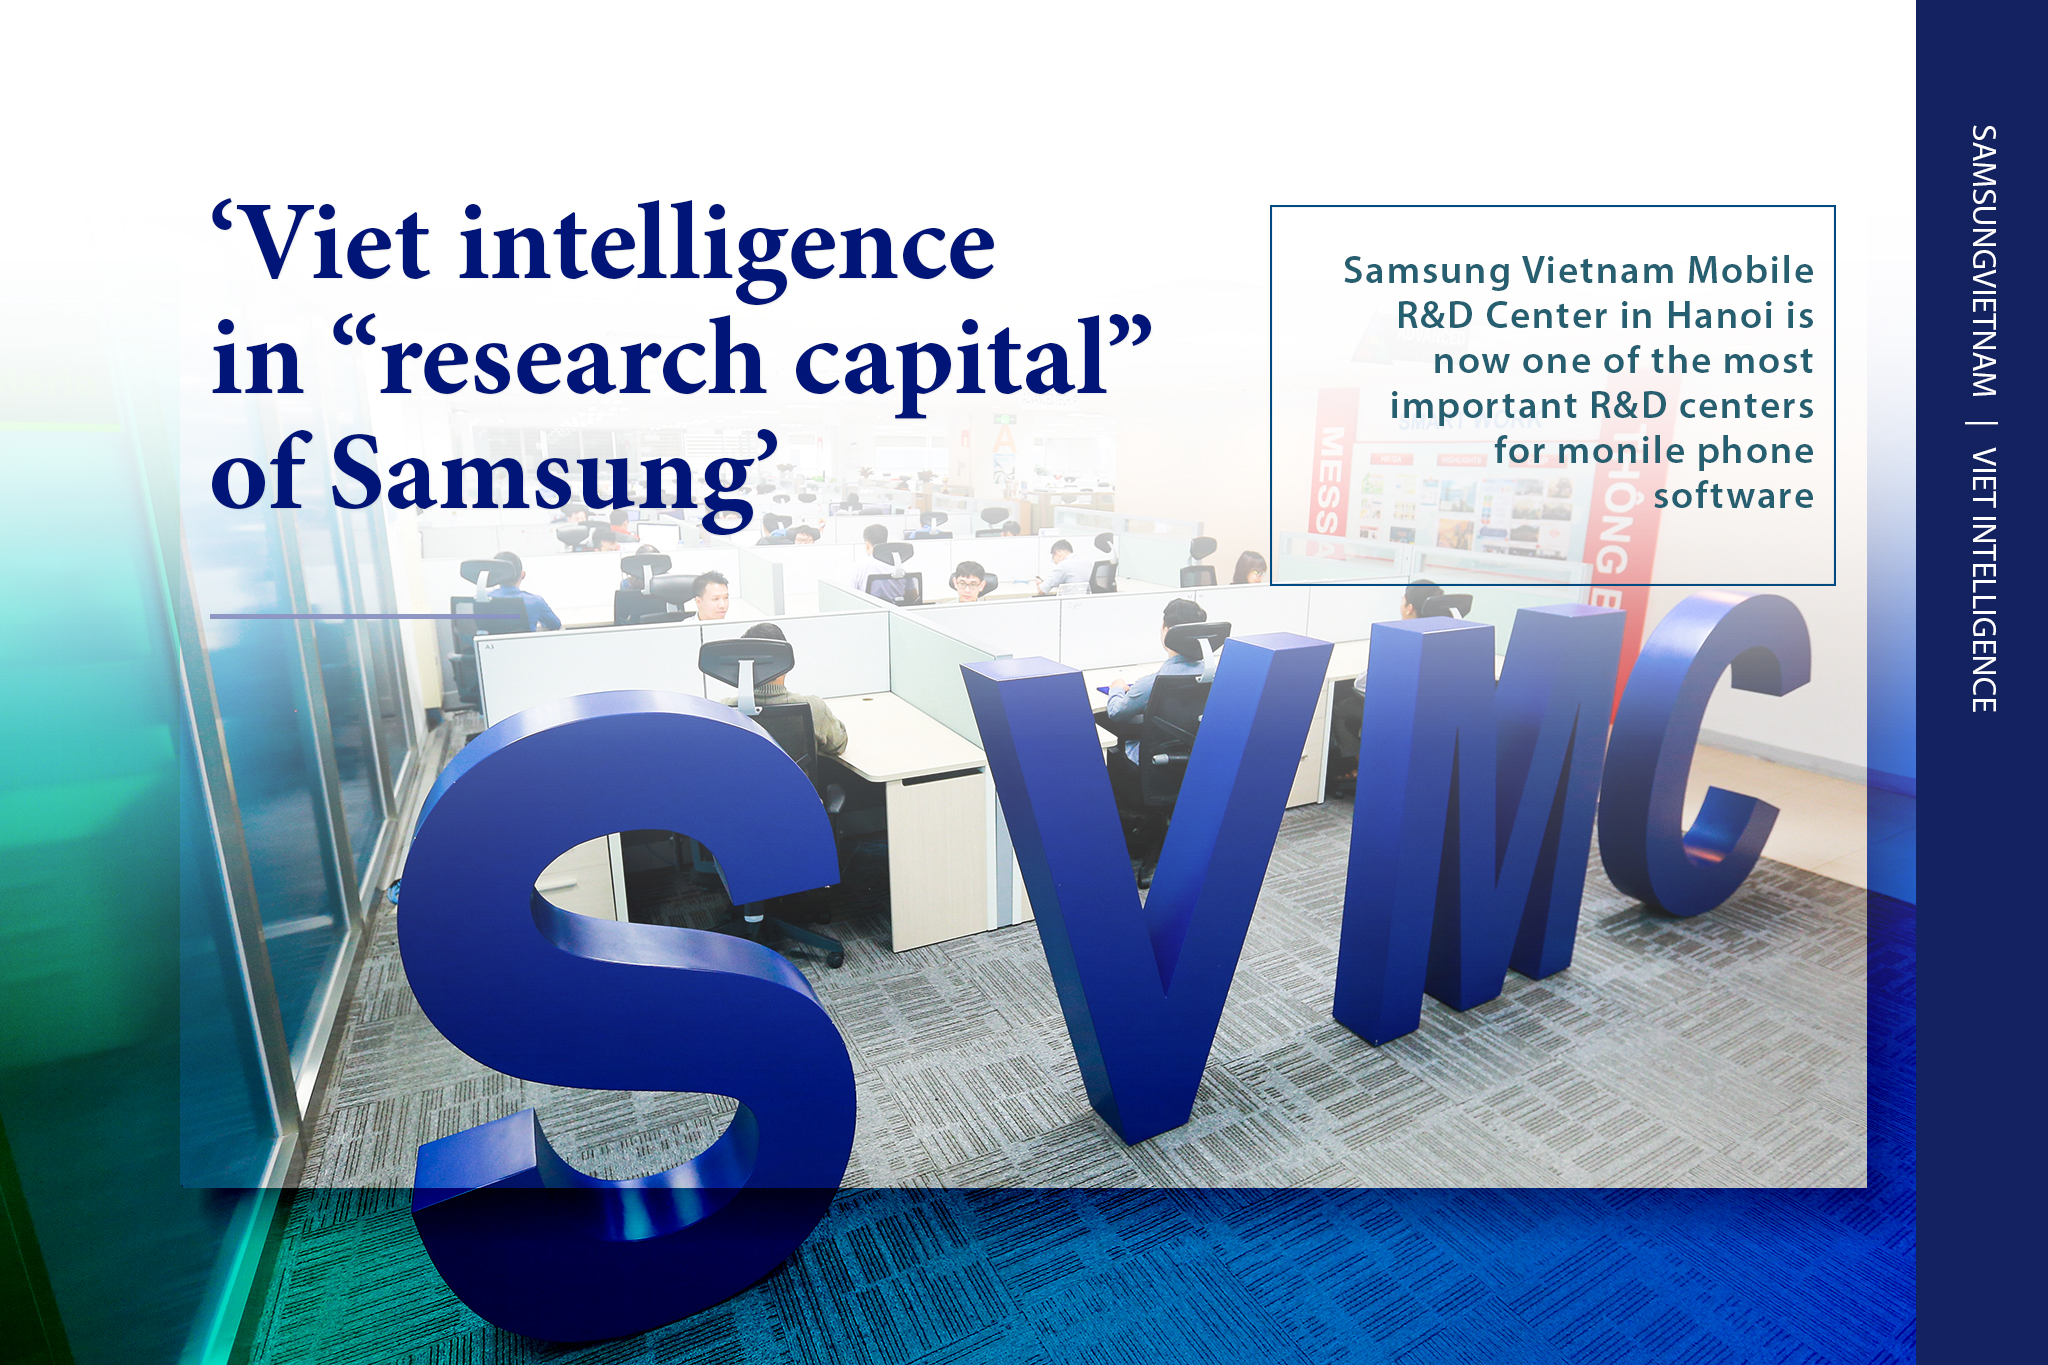 Viet intelligence in research capital of Samsung